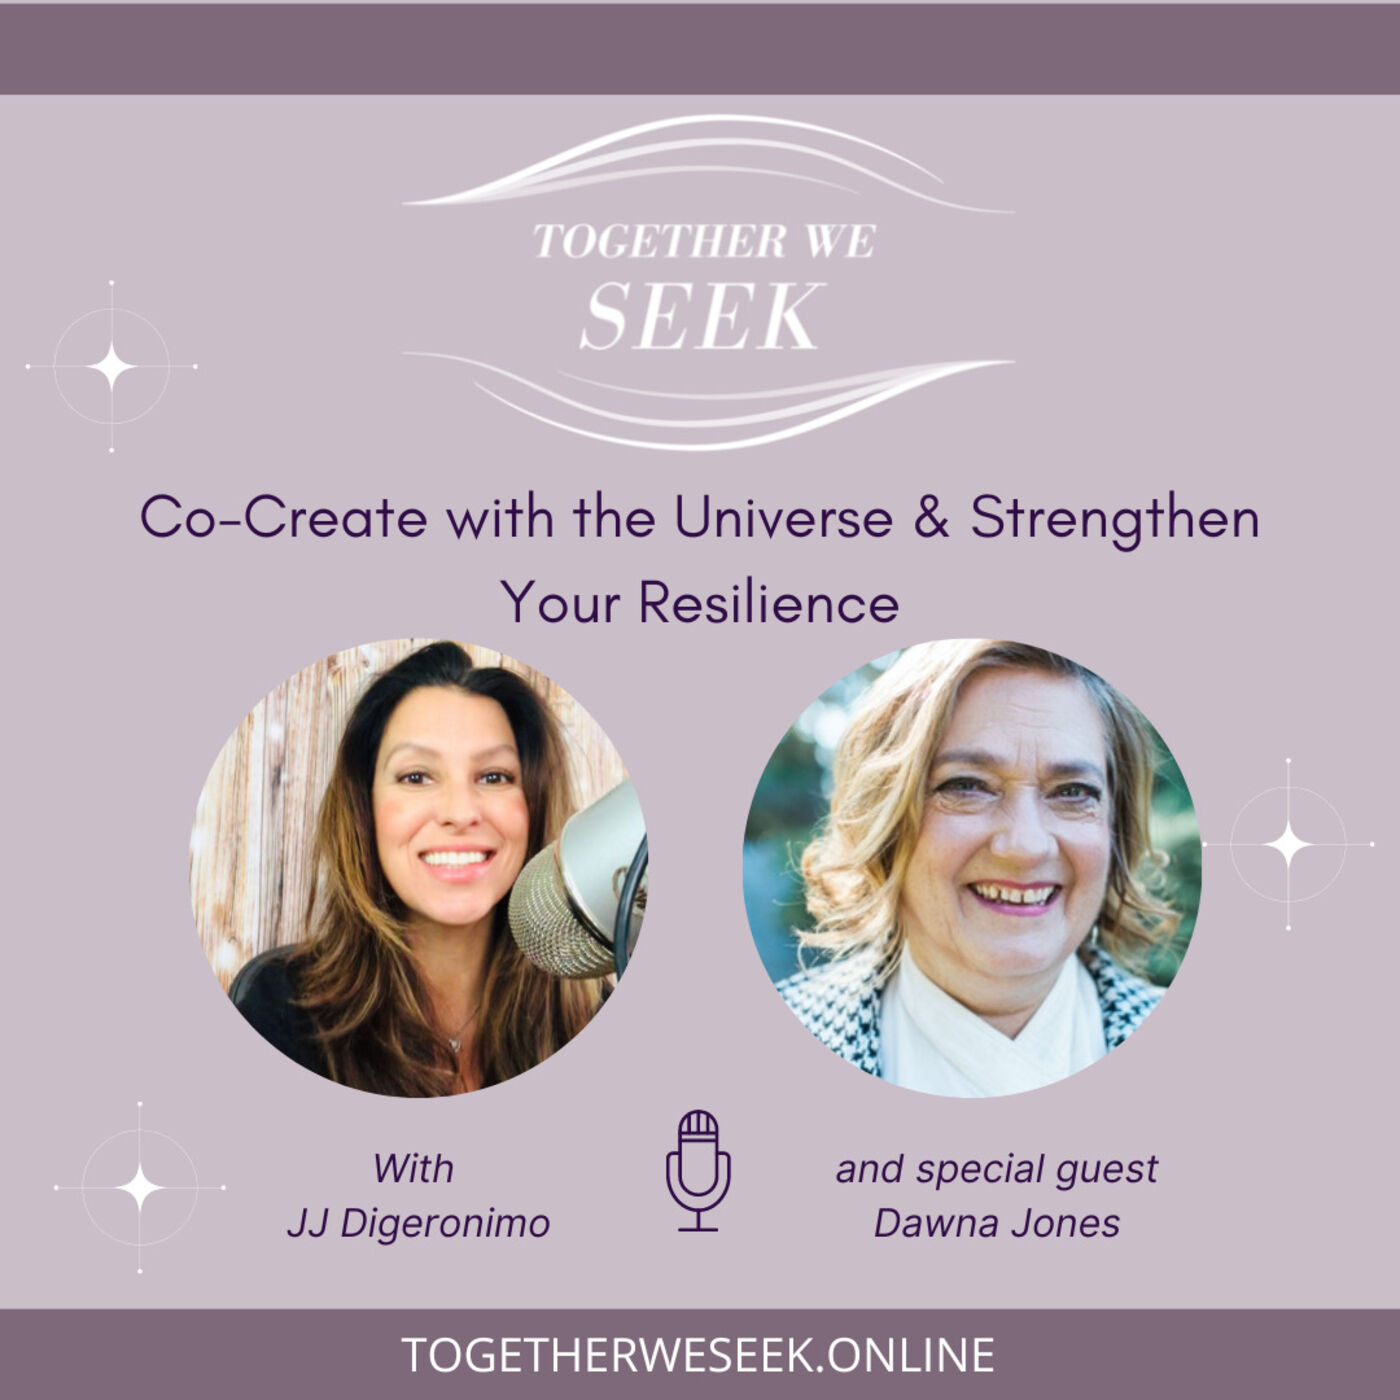 Co-Create with the Universe & Strengthen Your Resilience with Dawna Jones